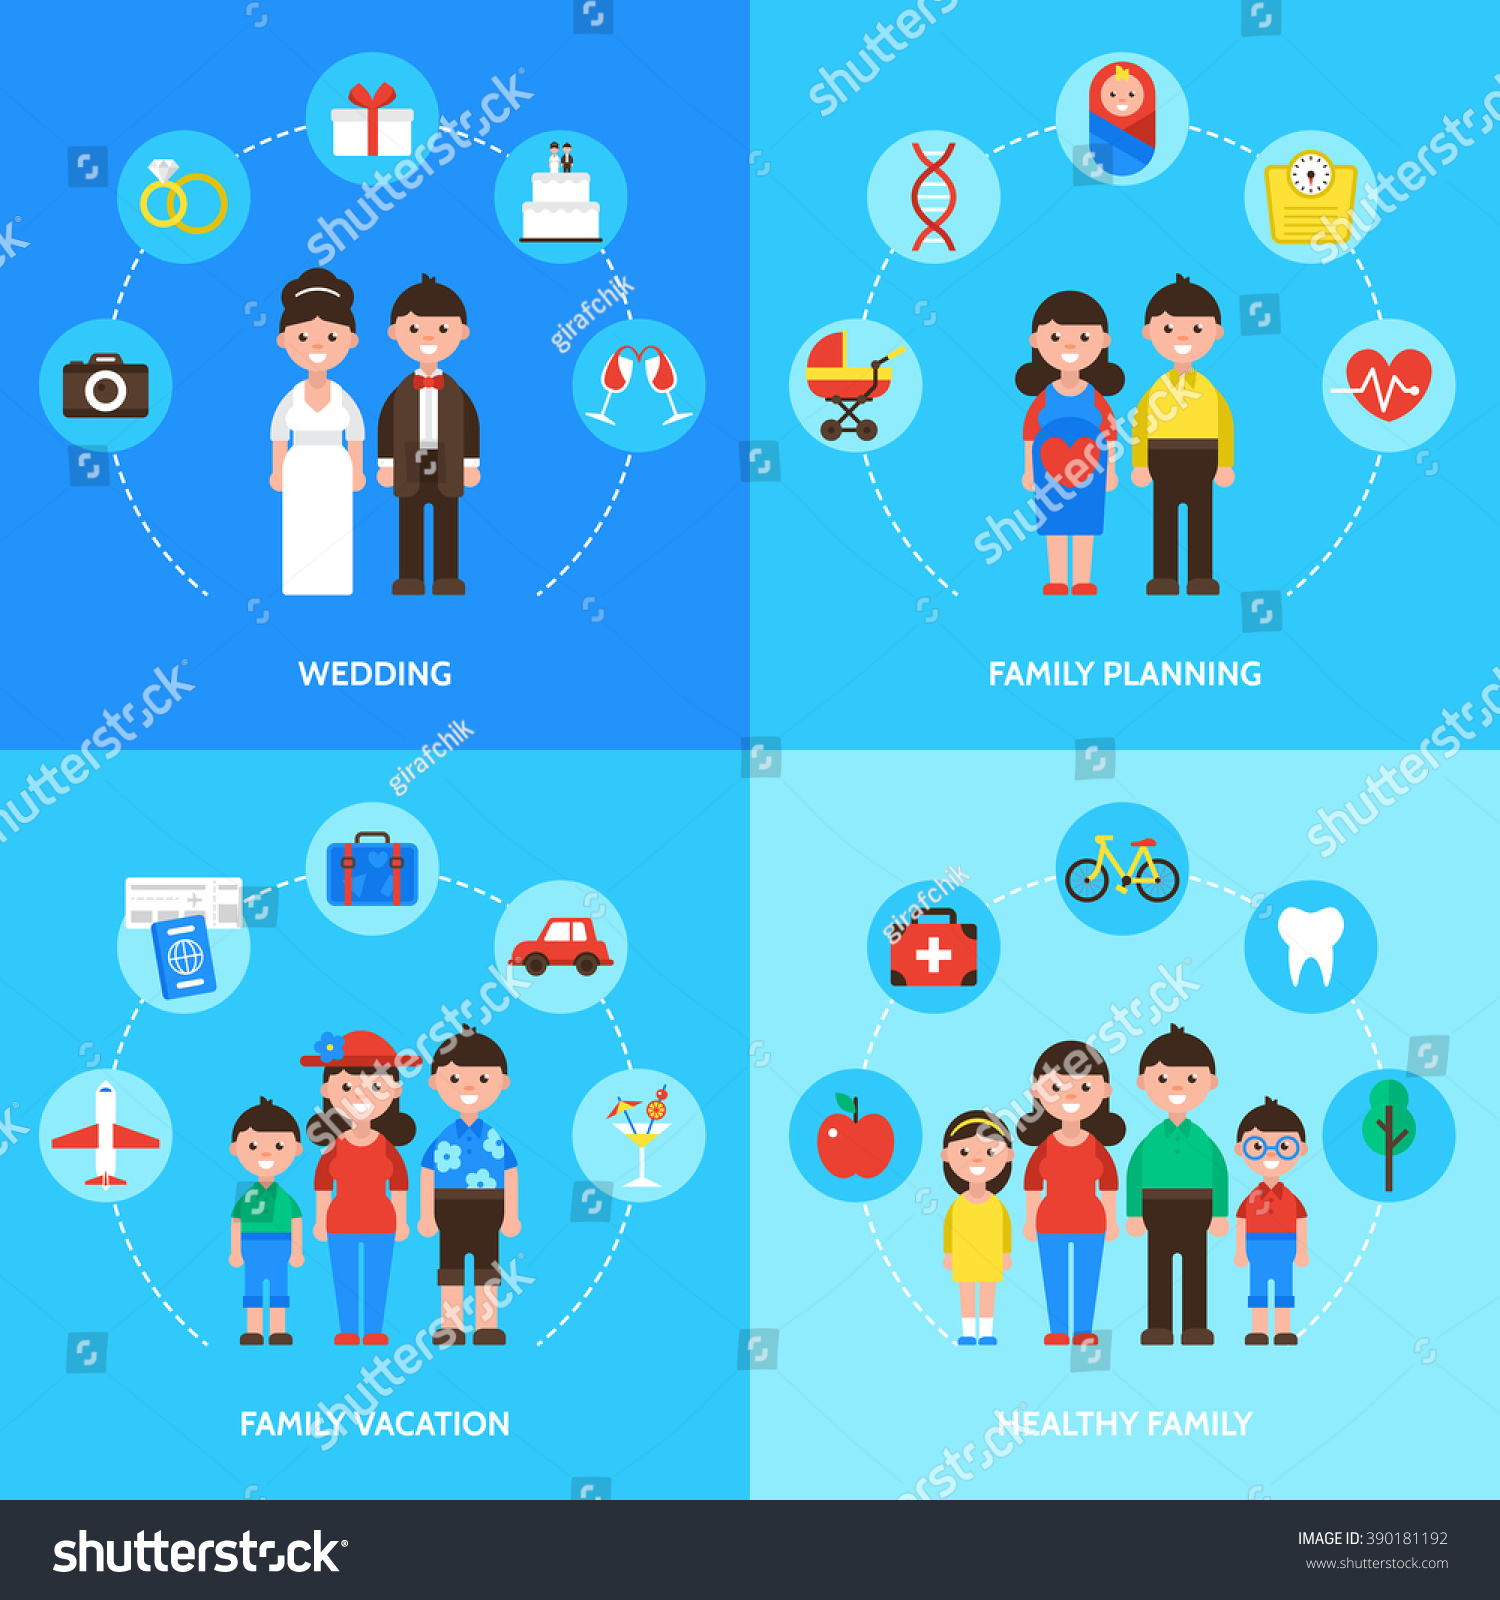 Download Family Concept Wedding Family Planning Family Stock Vector 390181192 - Shutterstock